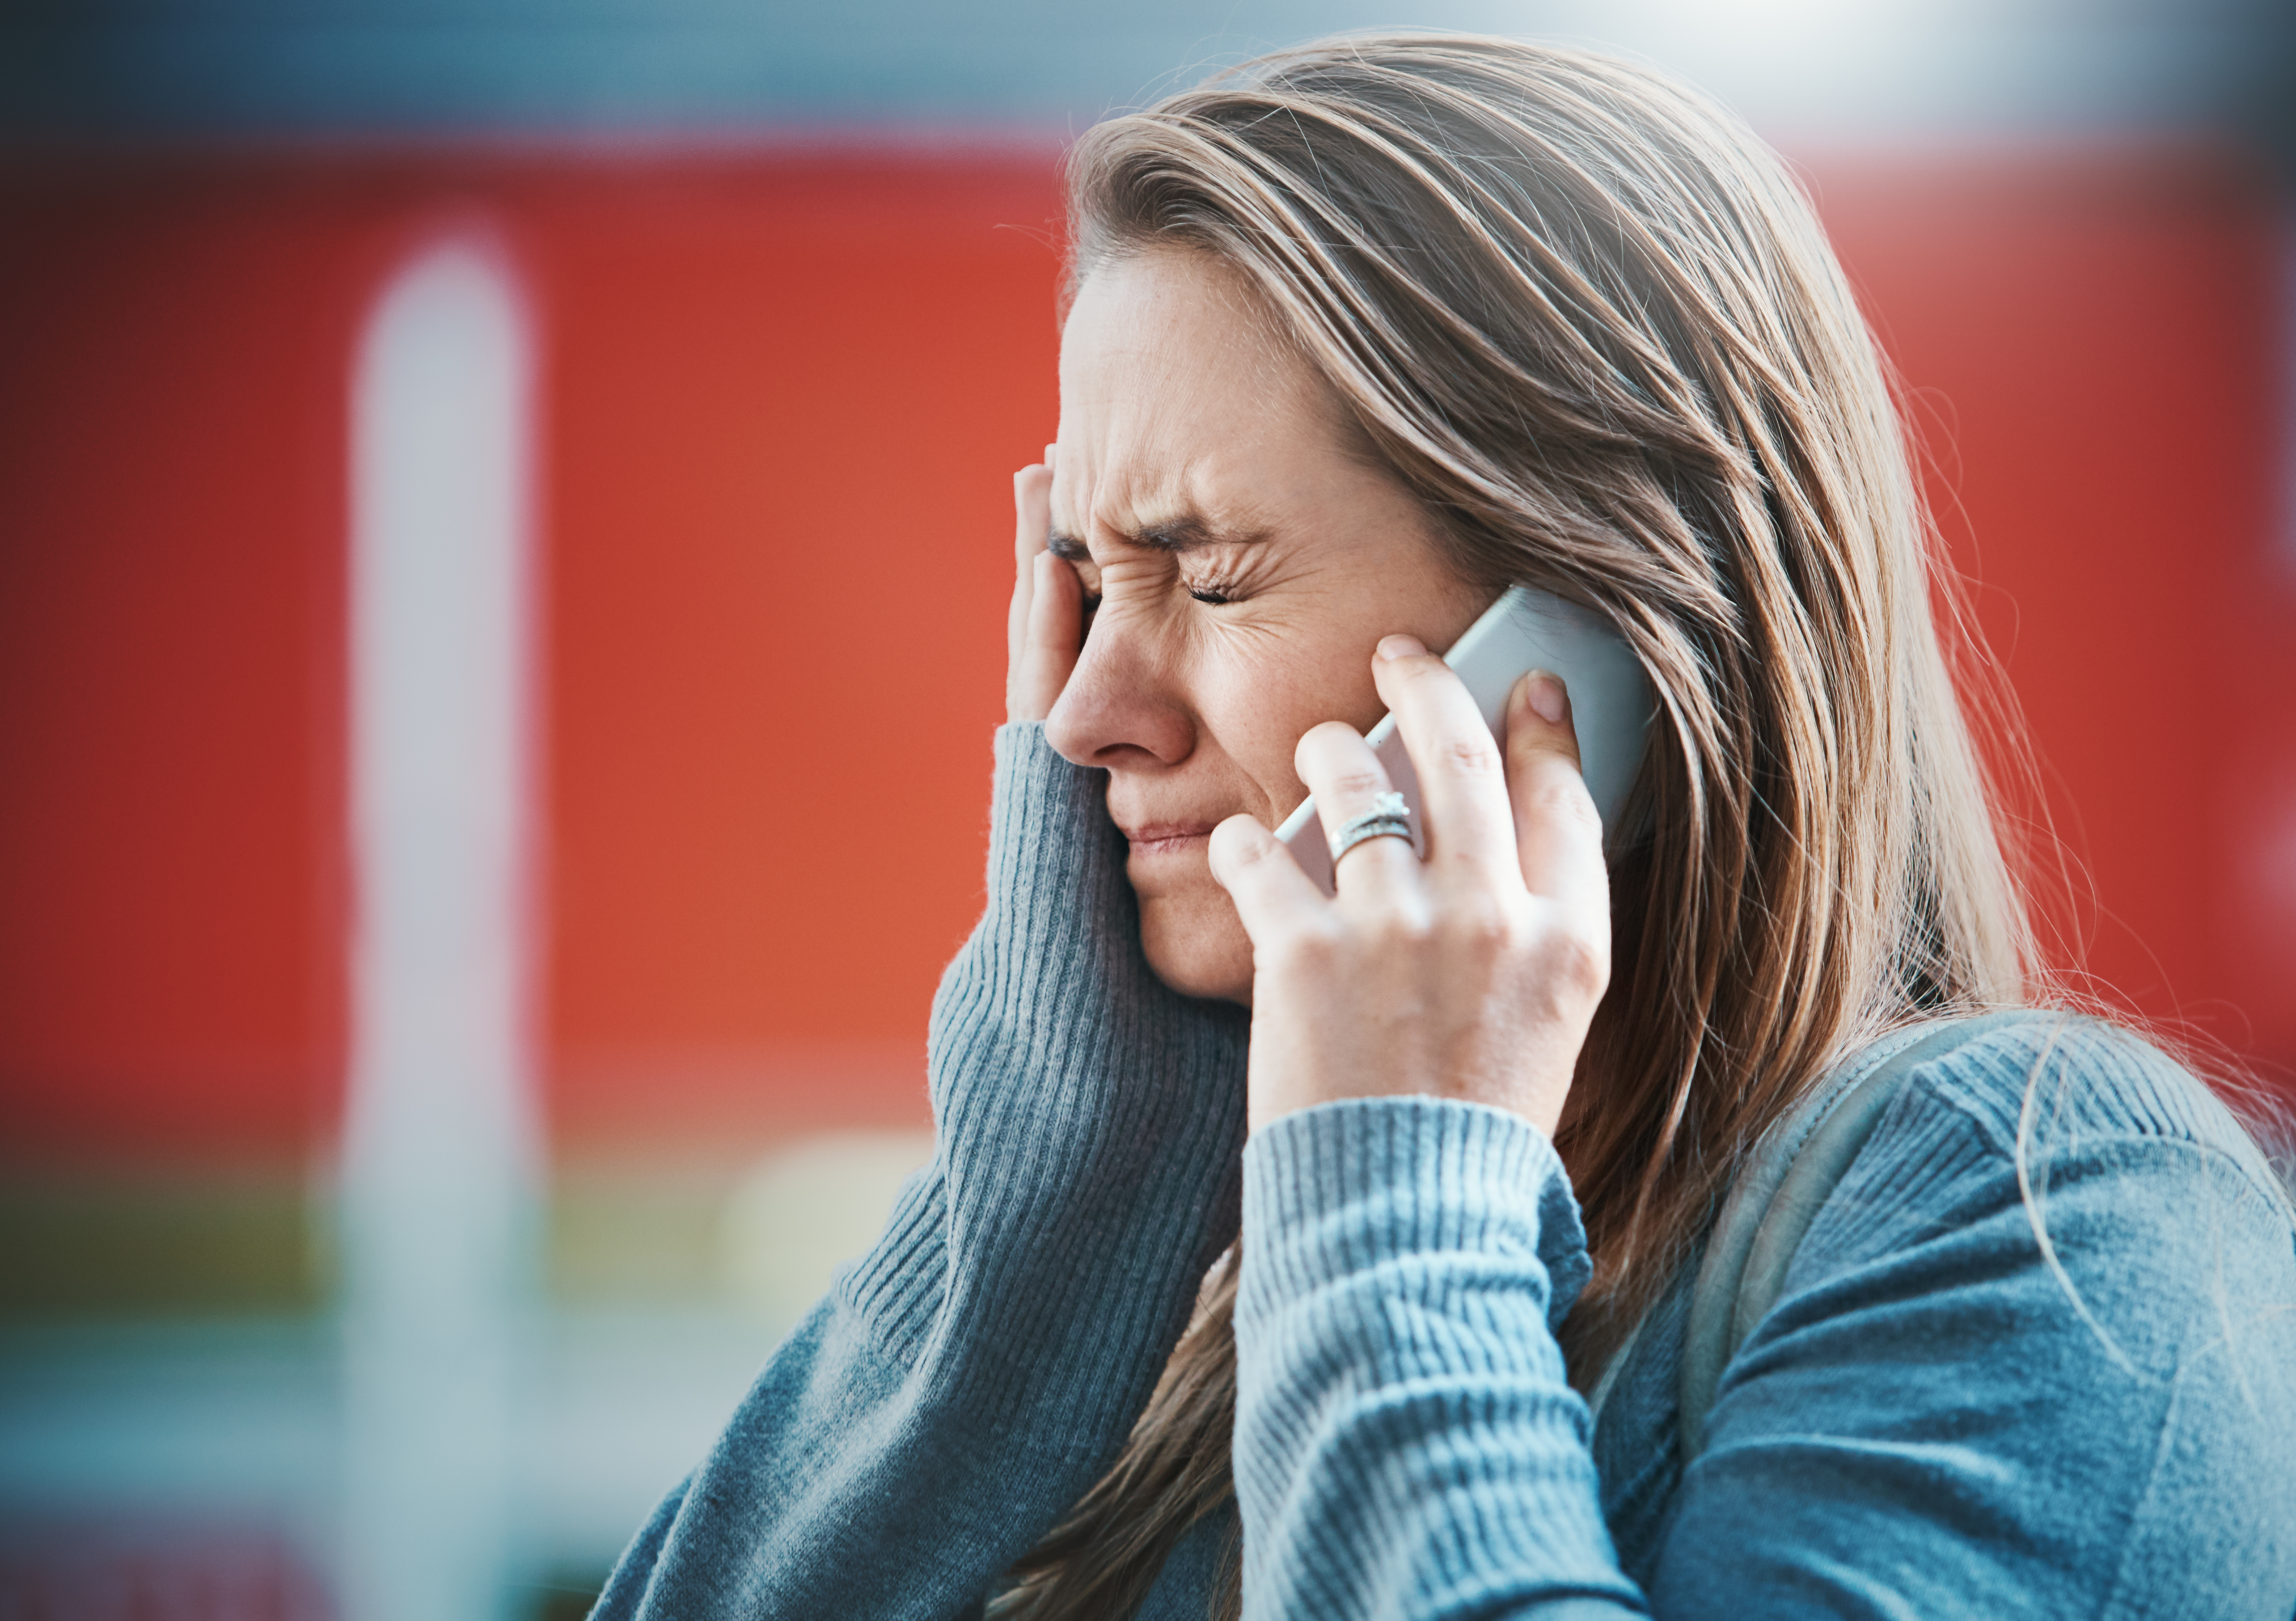 Young woman holding back tears on phone | Source: Getty Images